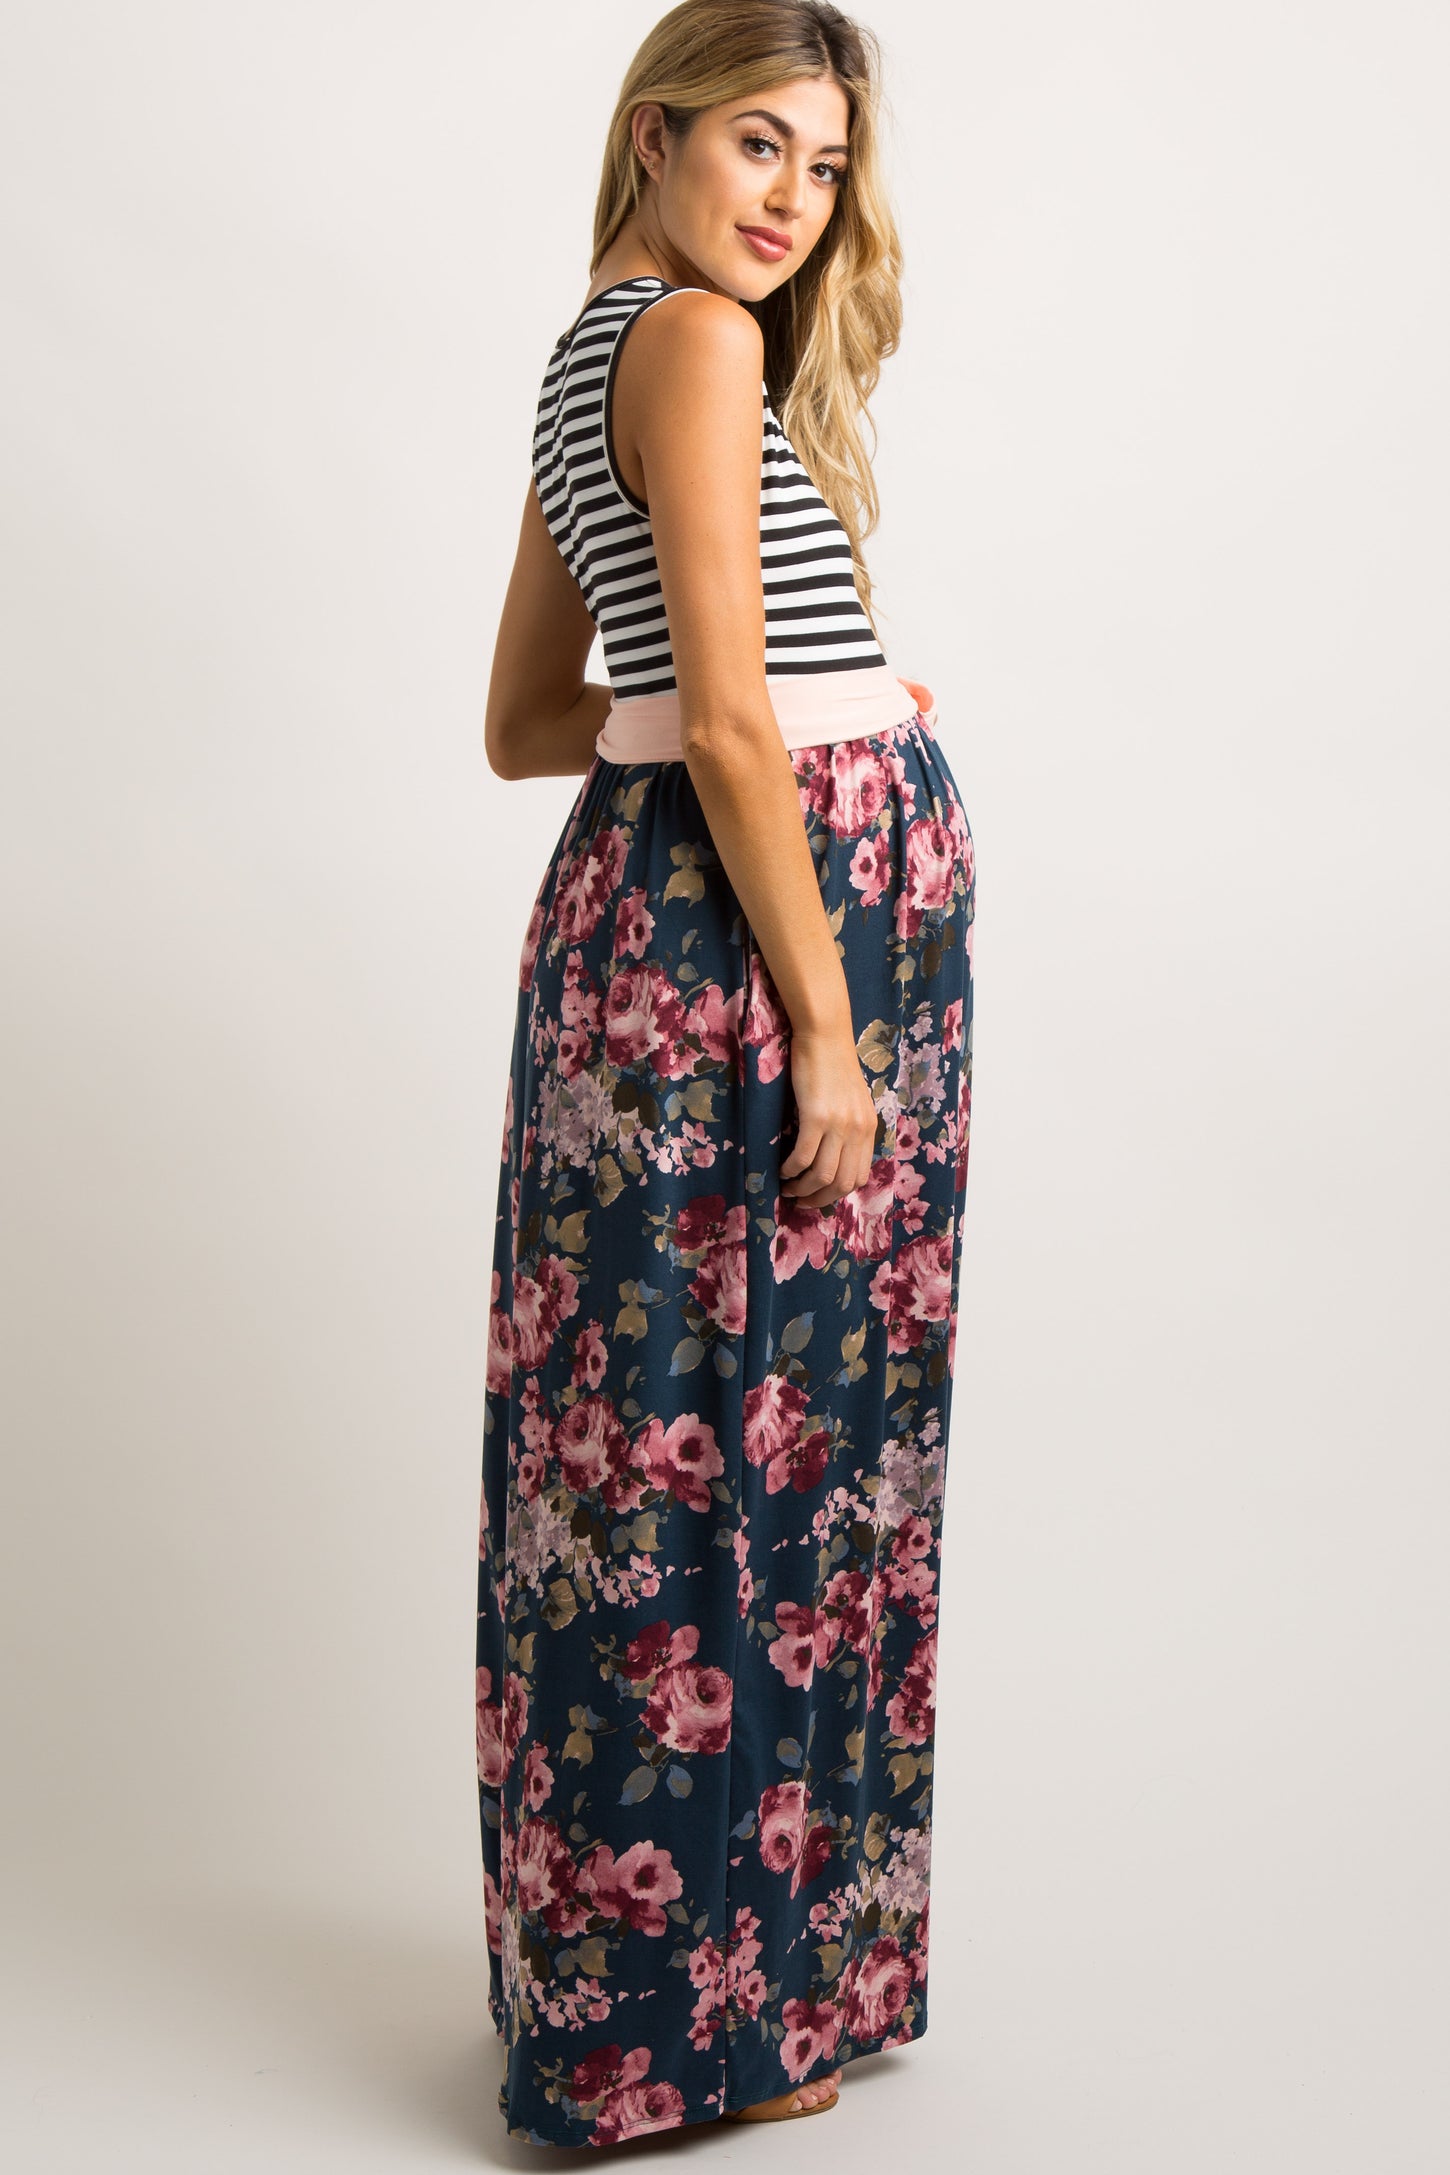 Teal Floral Striped Sash Tie Maternity Maxi Dress